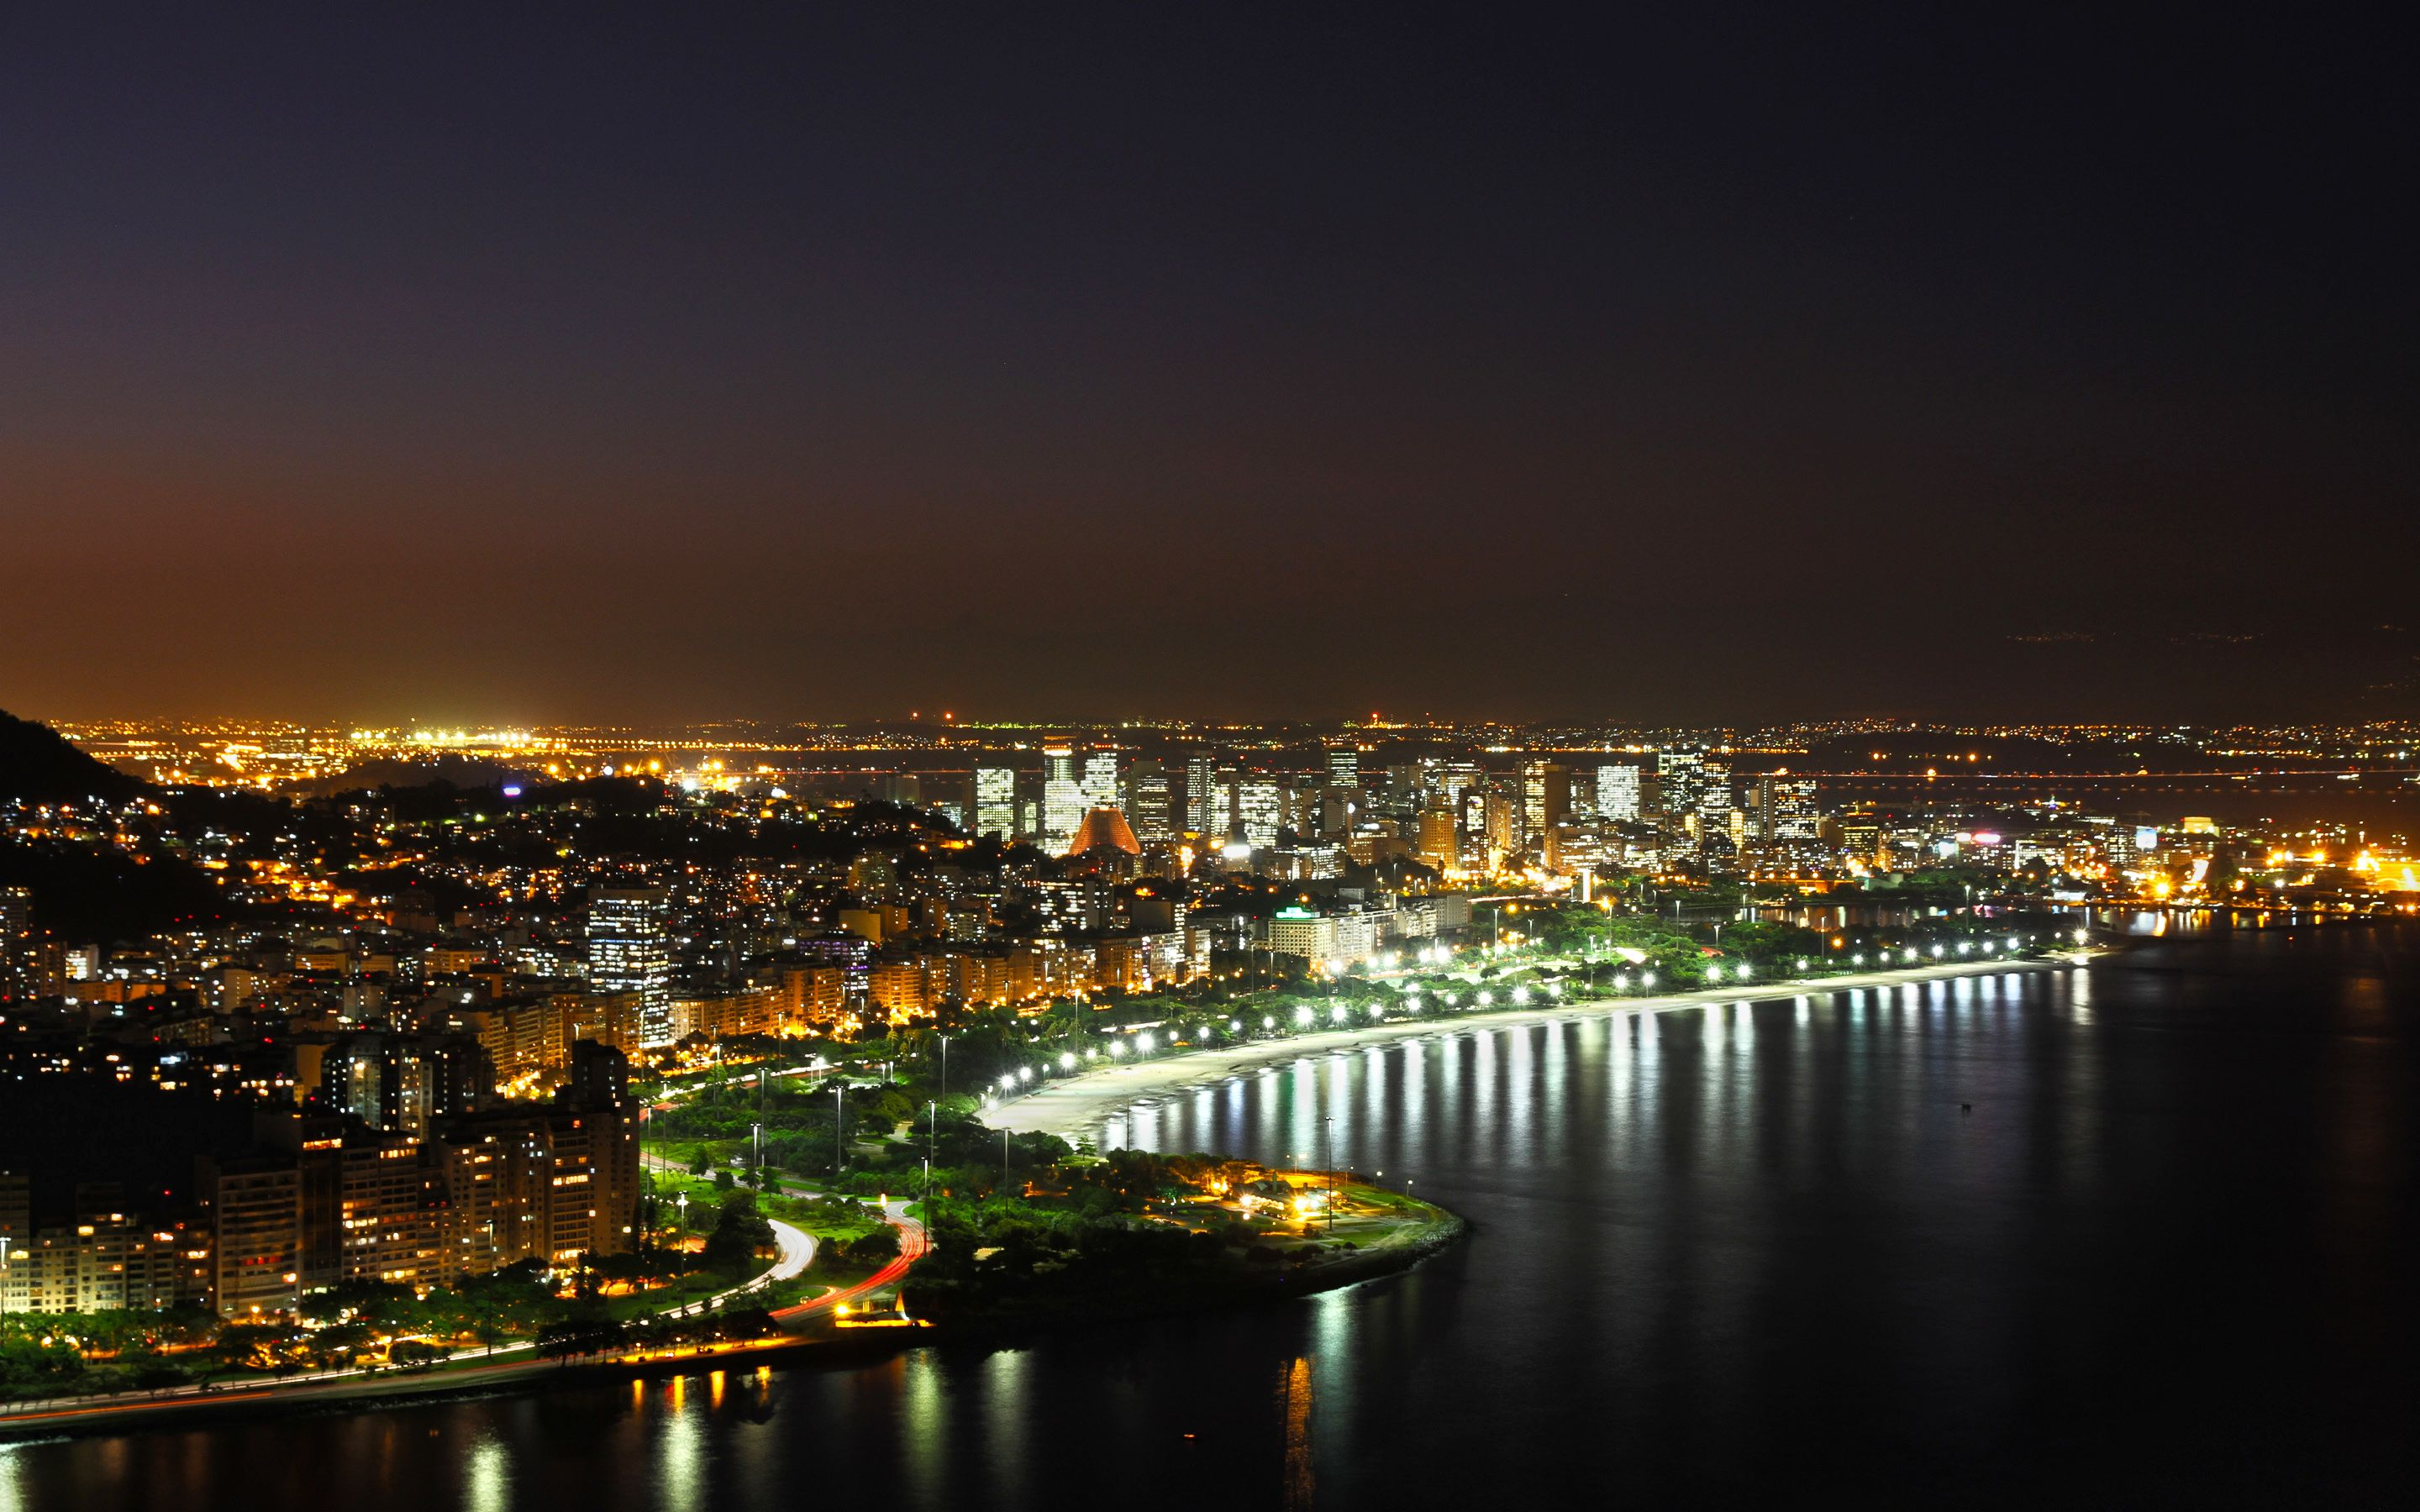 2880x1800 Exciting view of Rio de Janeiro at night wallpaper | Rio de janeiro, Macbook air wallpaper, Beach wallpaper